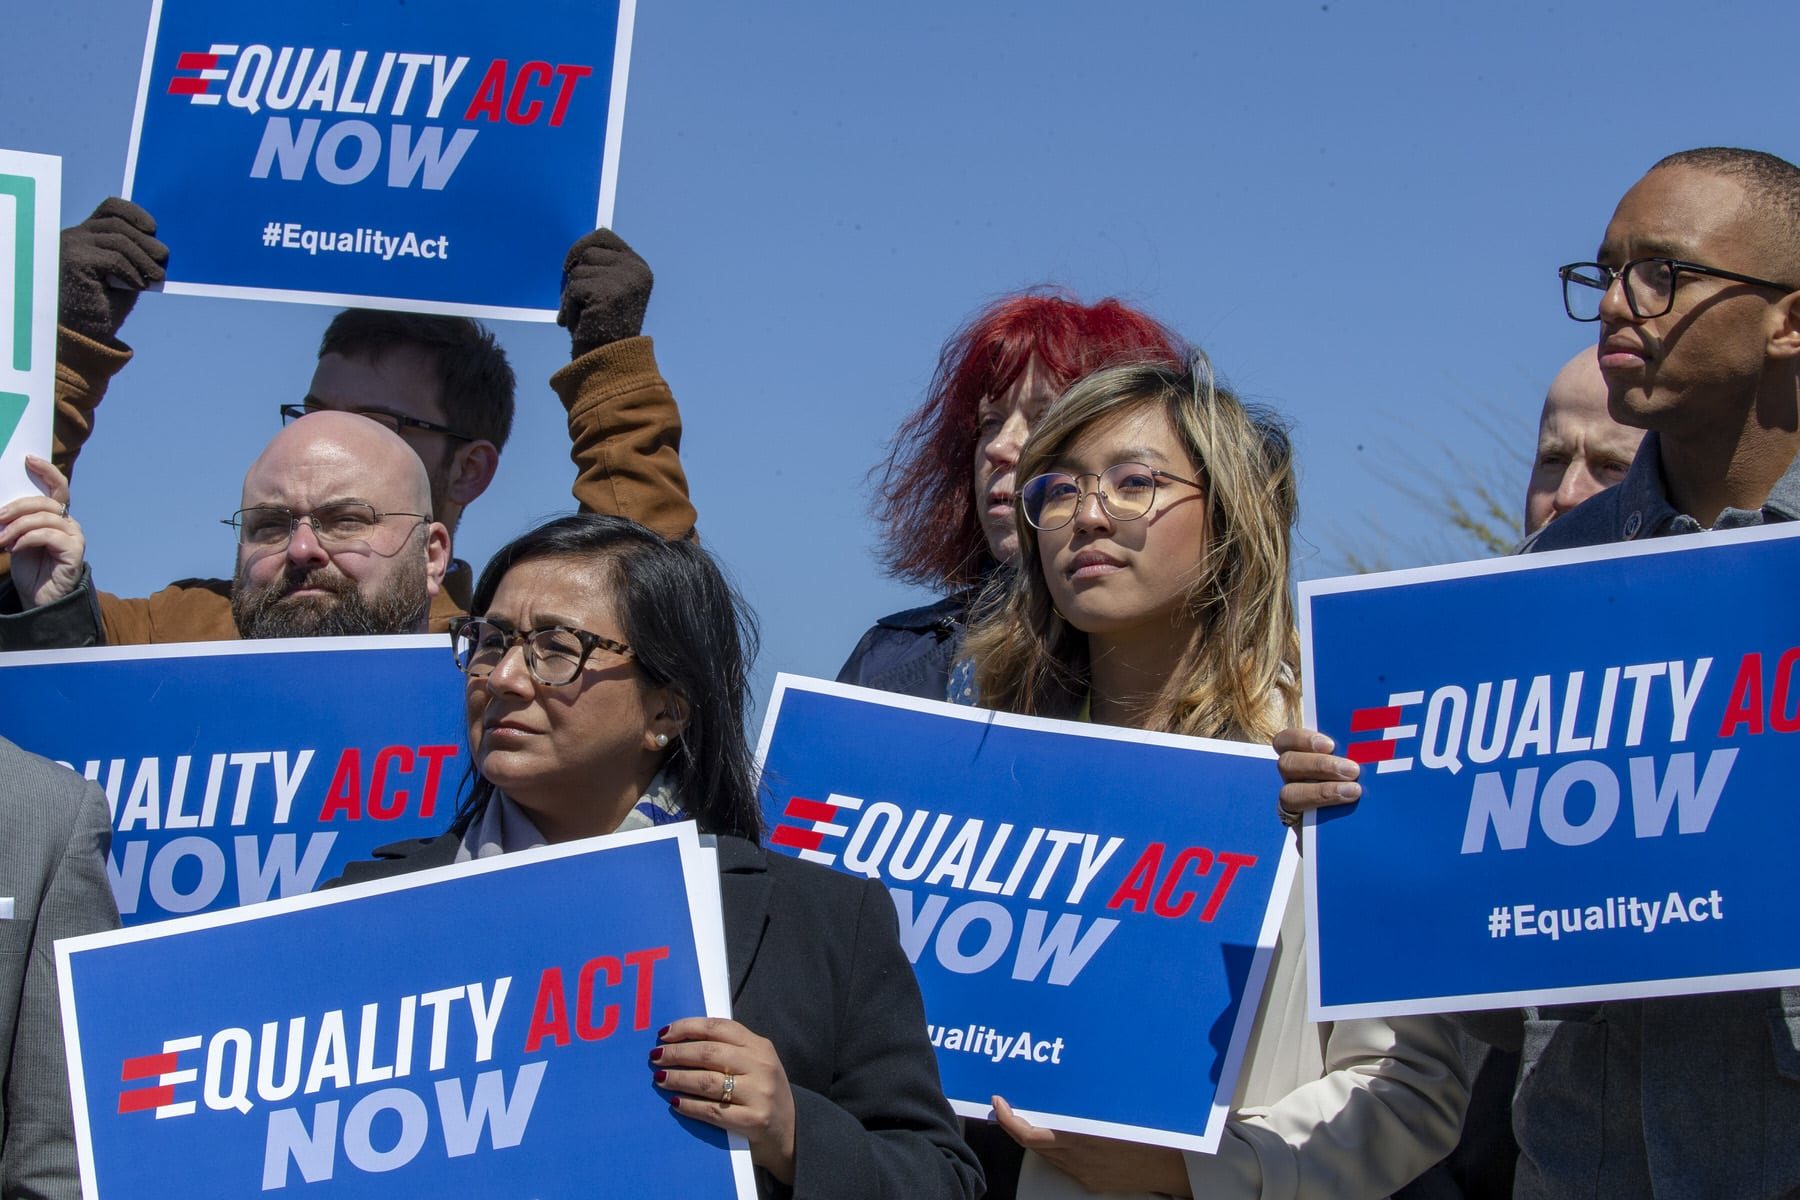 Protesters stand in support of a introduction of the Equality Act.